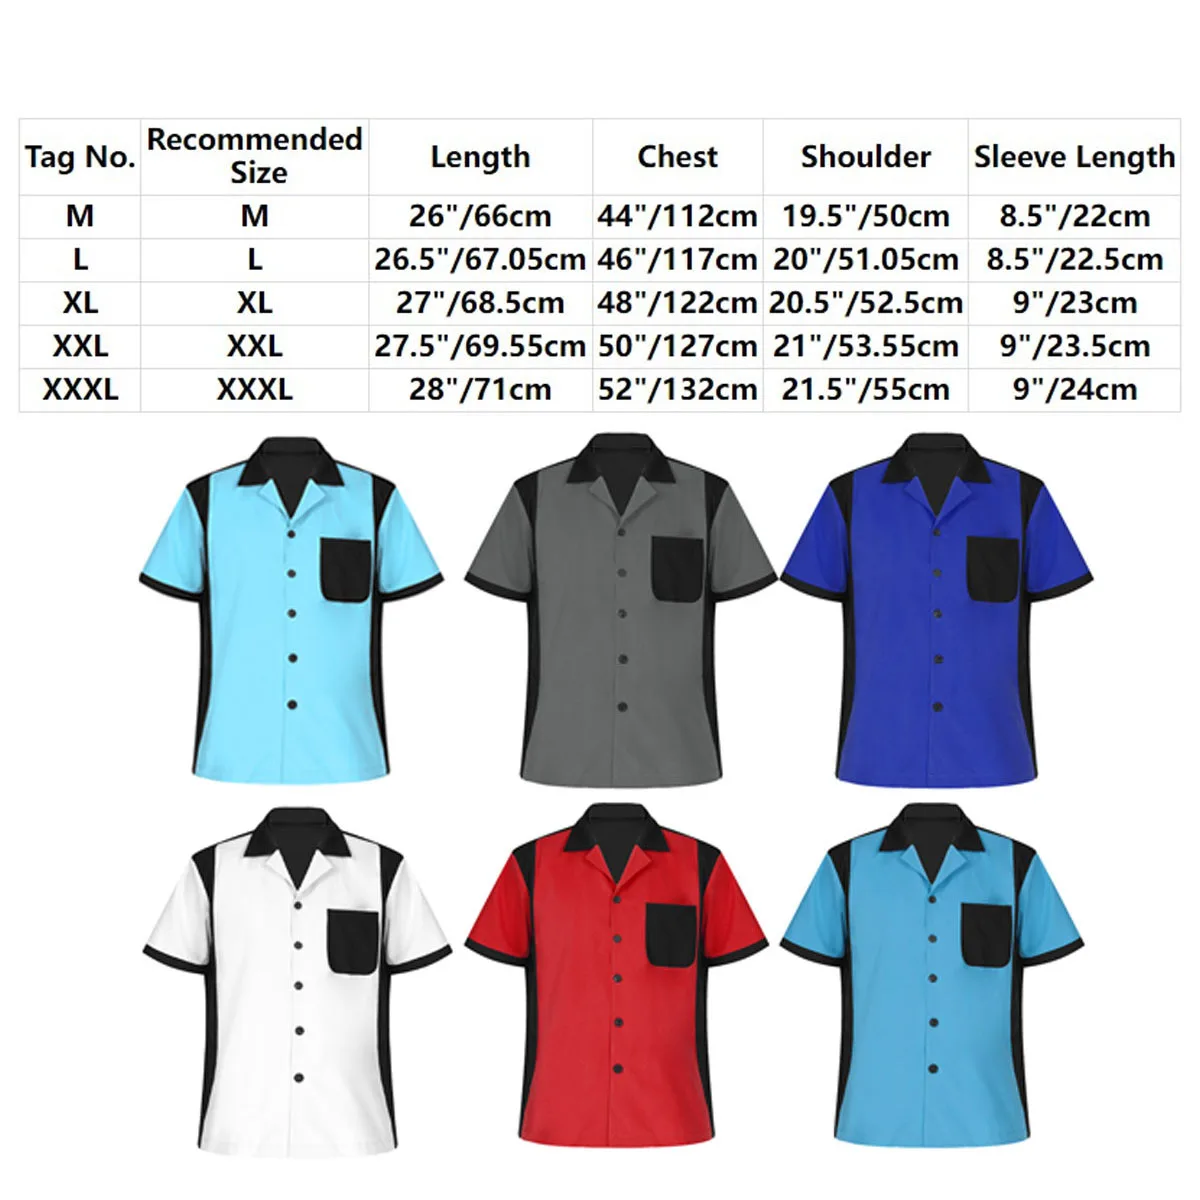 Bowling Retro Mens Short-Sleeve Shirt New Hot 50's Classic Casual Color Block Notched Collar Button Down Tops Office Vacation